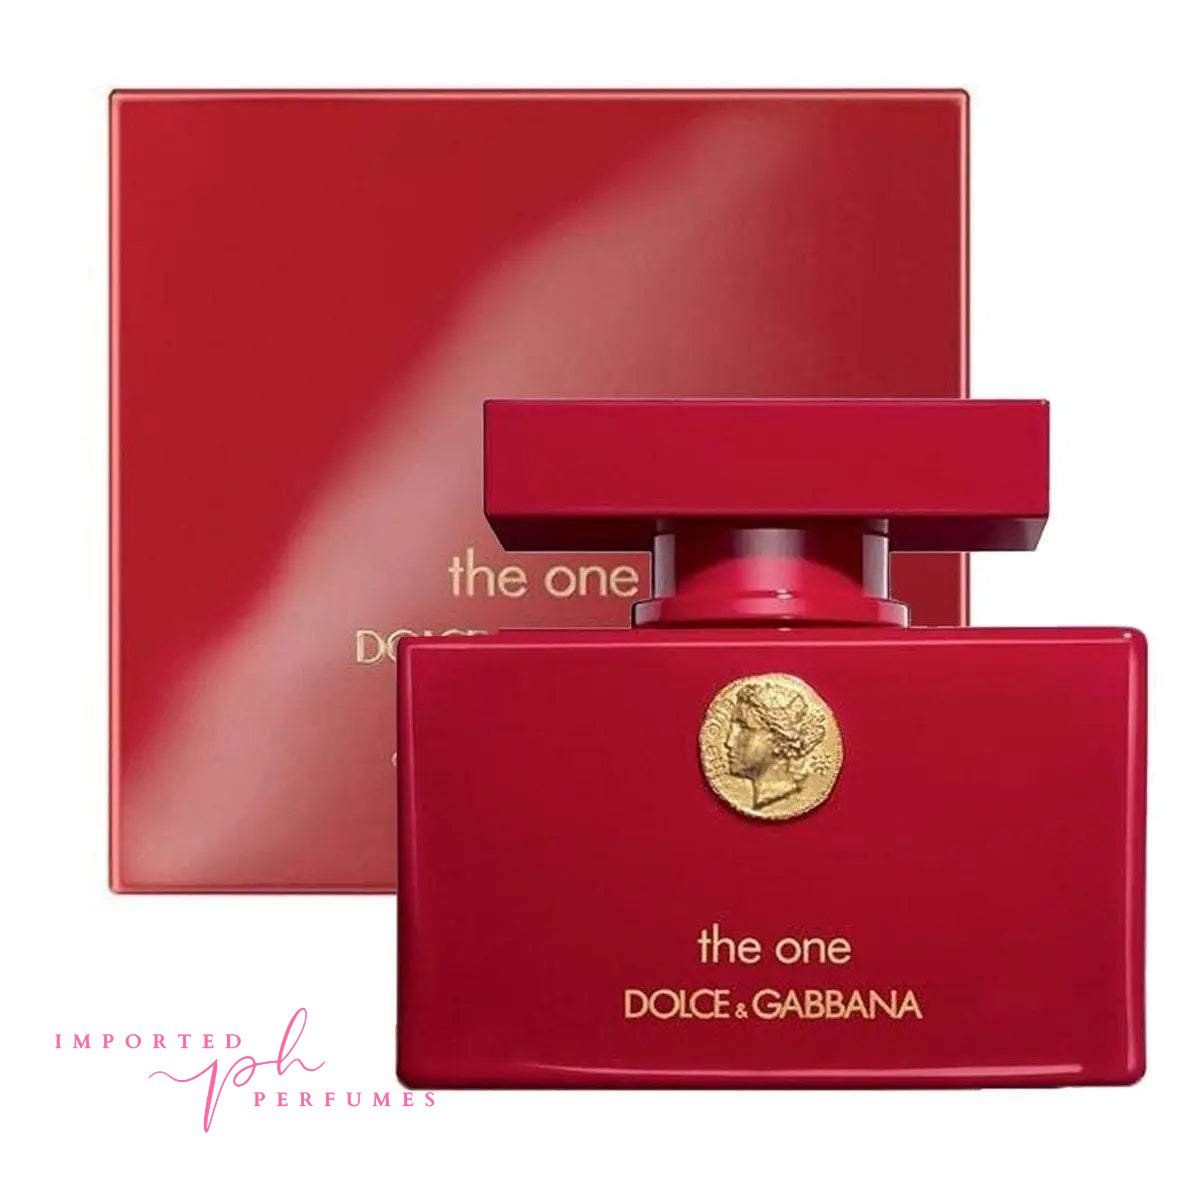 Dolce and Gabbana The One Collector’s Edition 75ml-Imported Perfumes Co-collector,Dolce,Dolce & Gabbana,women